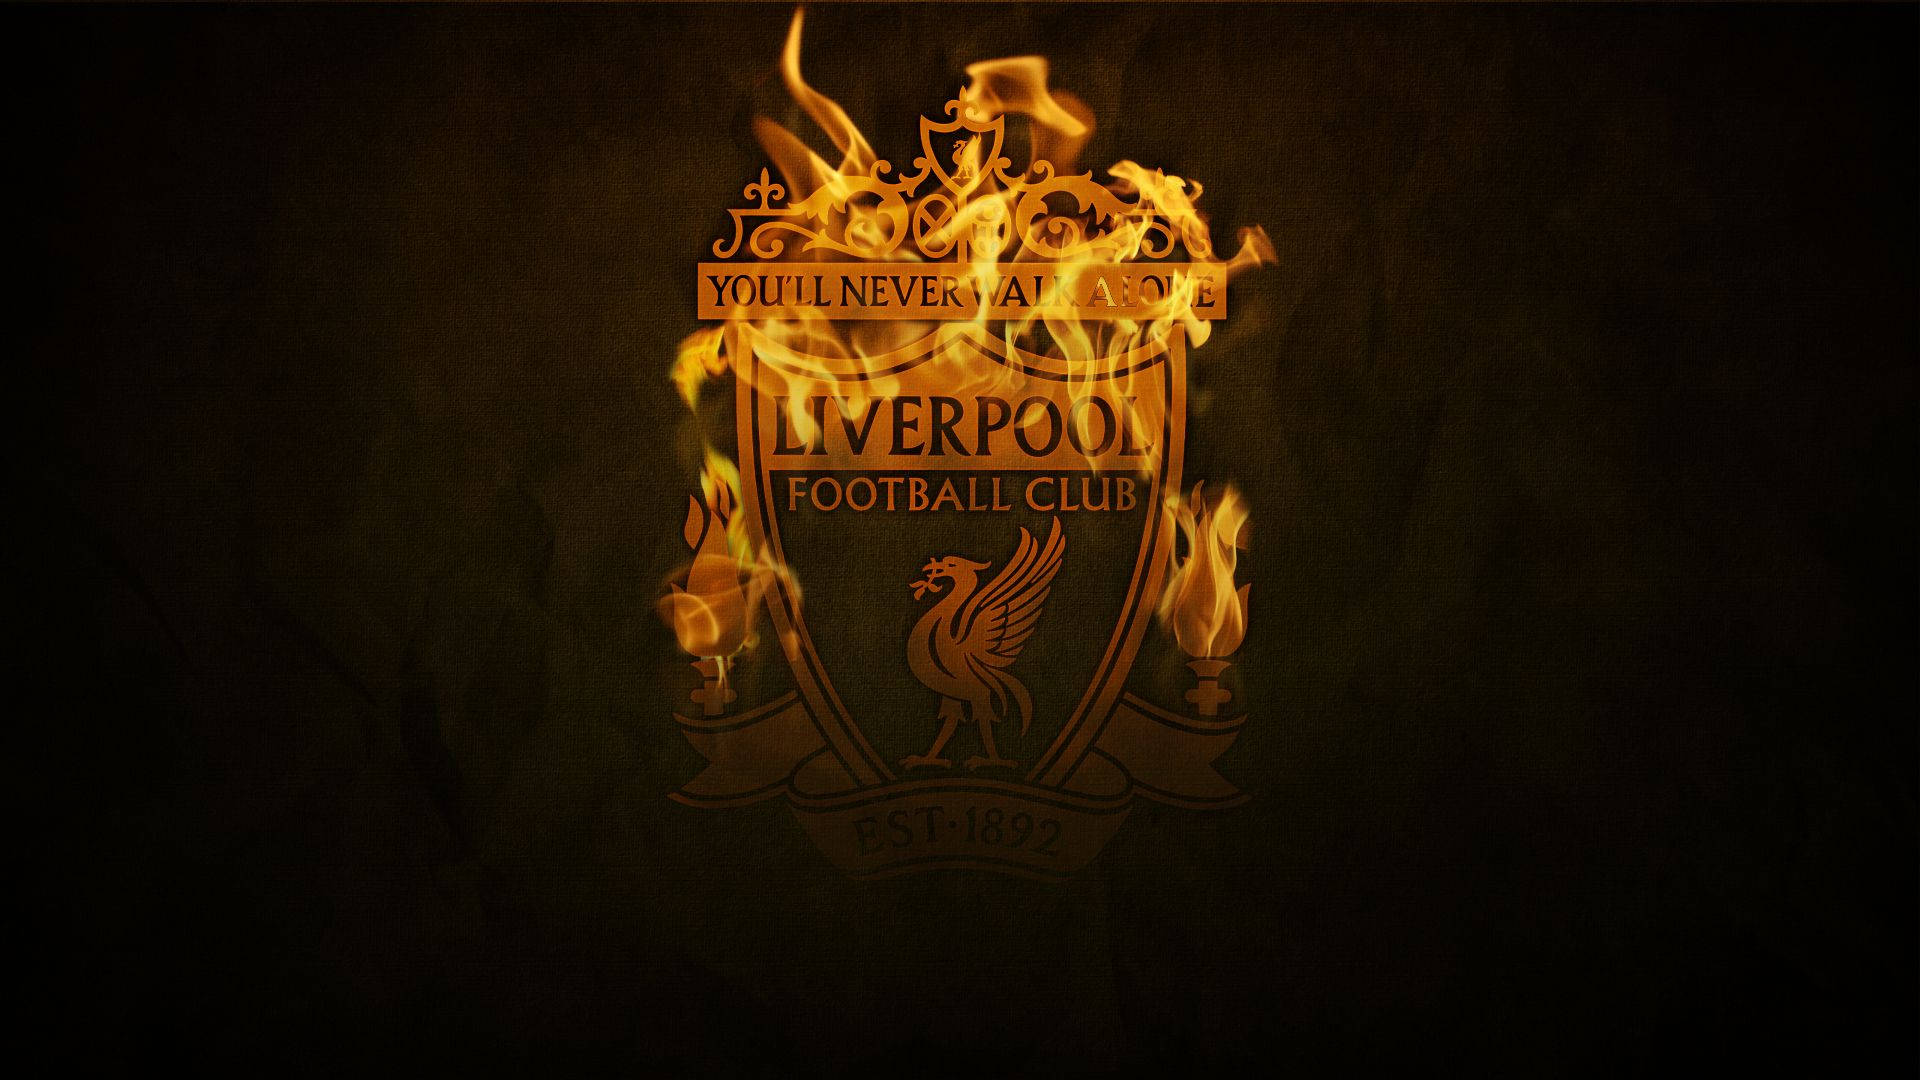 The Liverpool Fc Logo Is On Fire Background